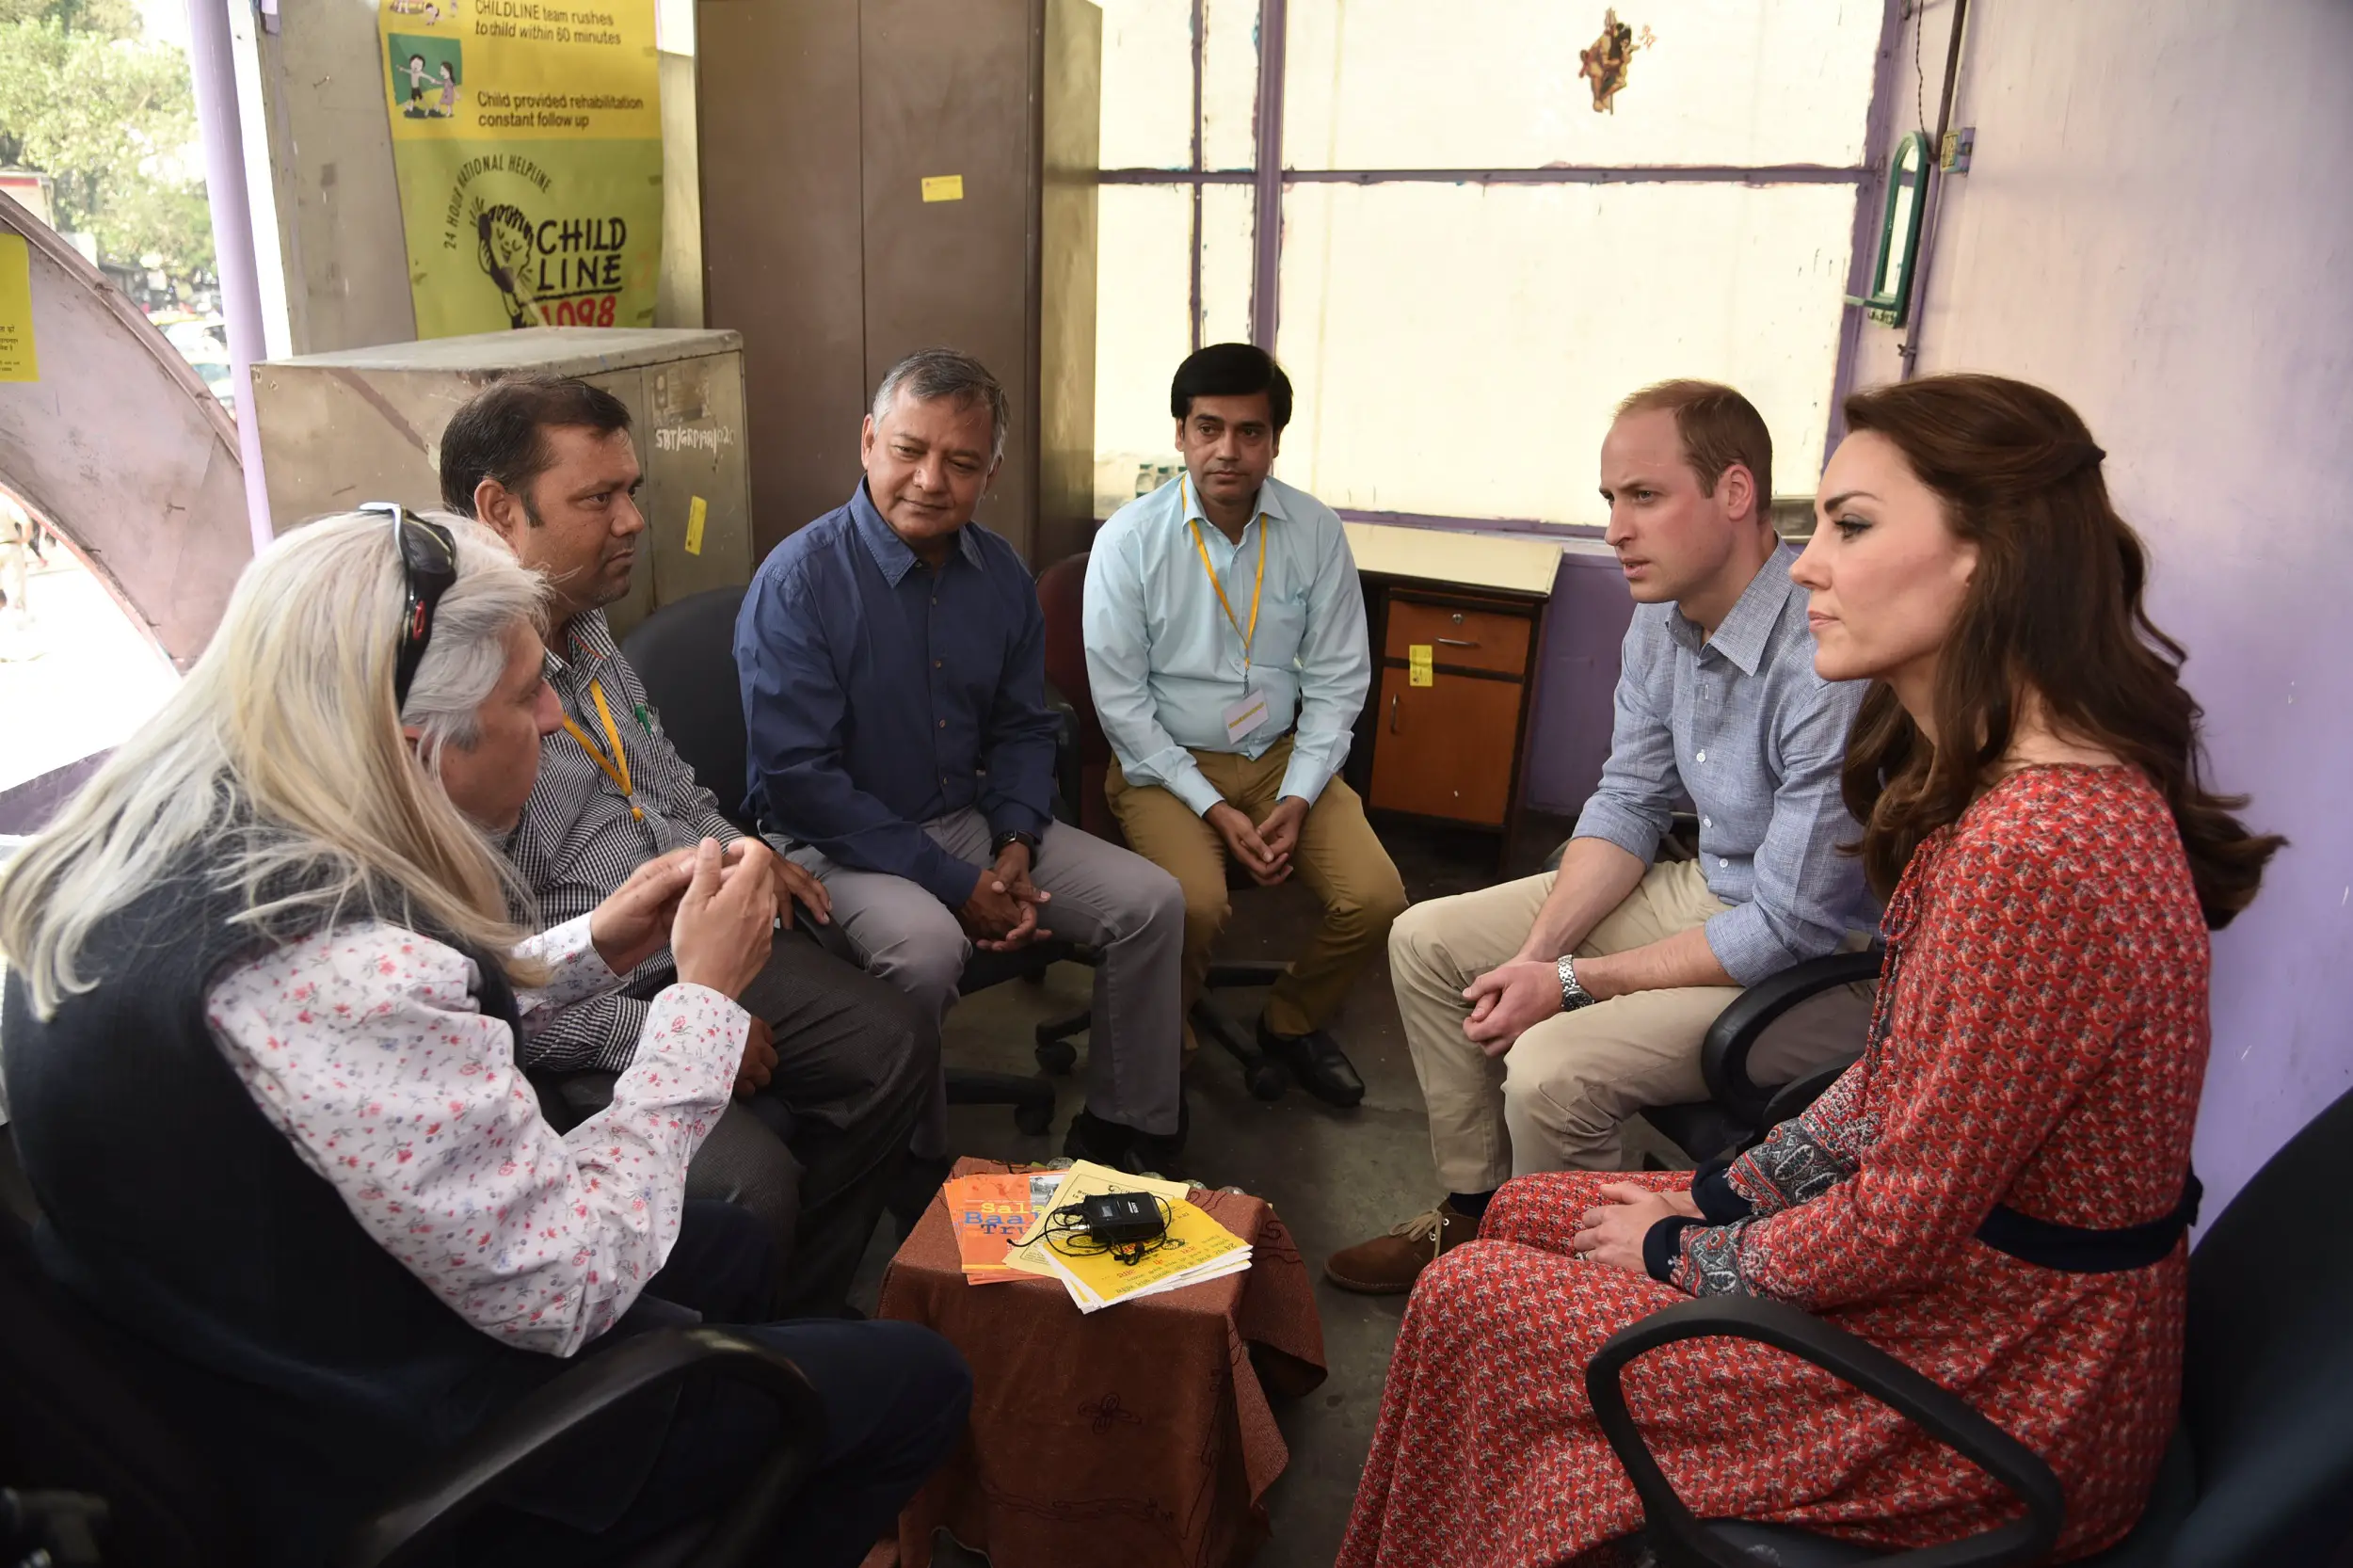 The Duke and Duchess of Cambridge talked to Mental health charities in India